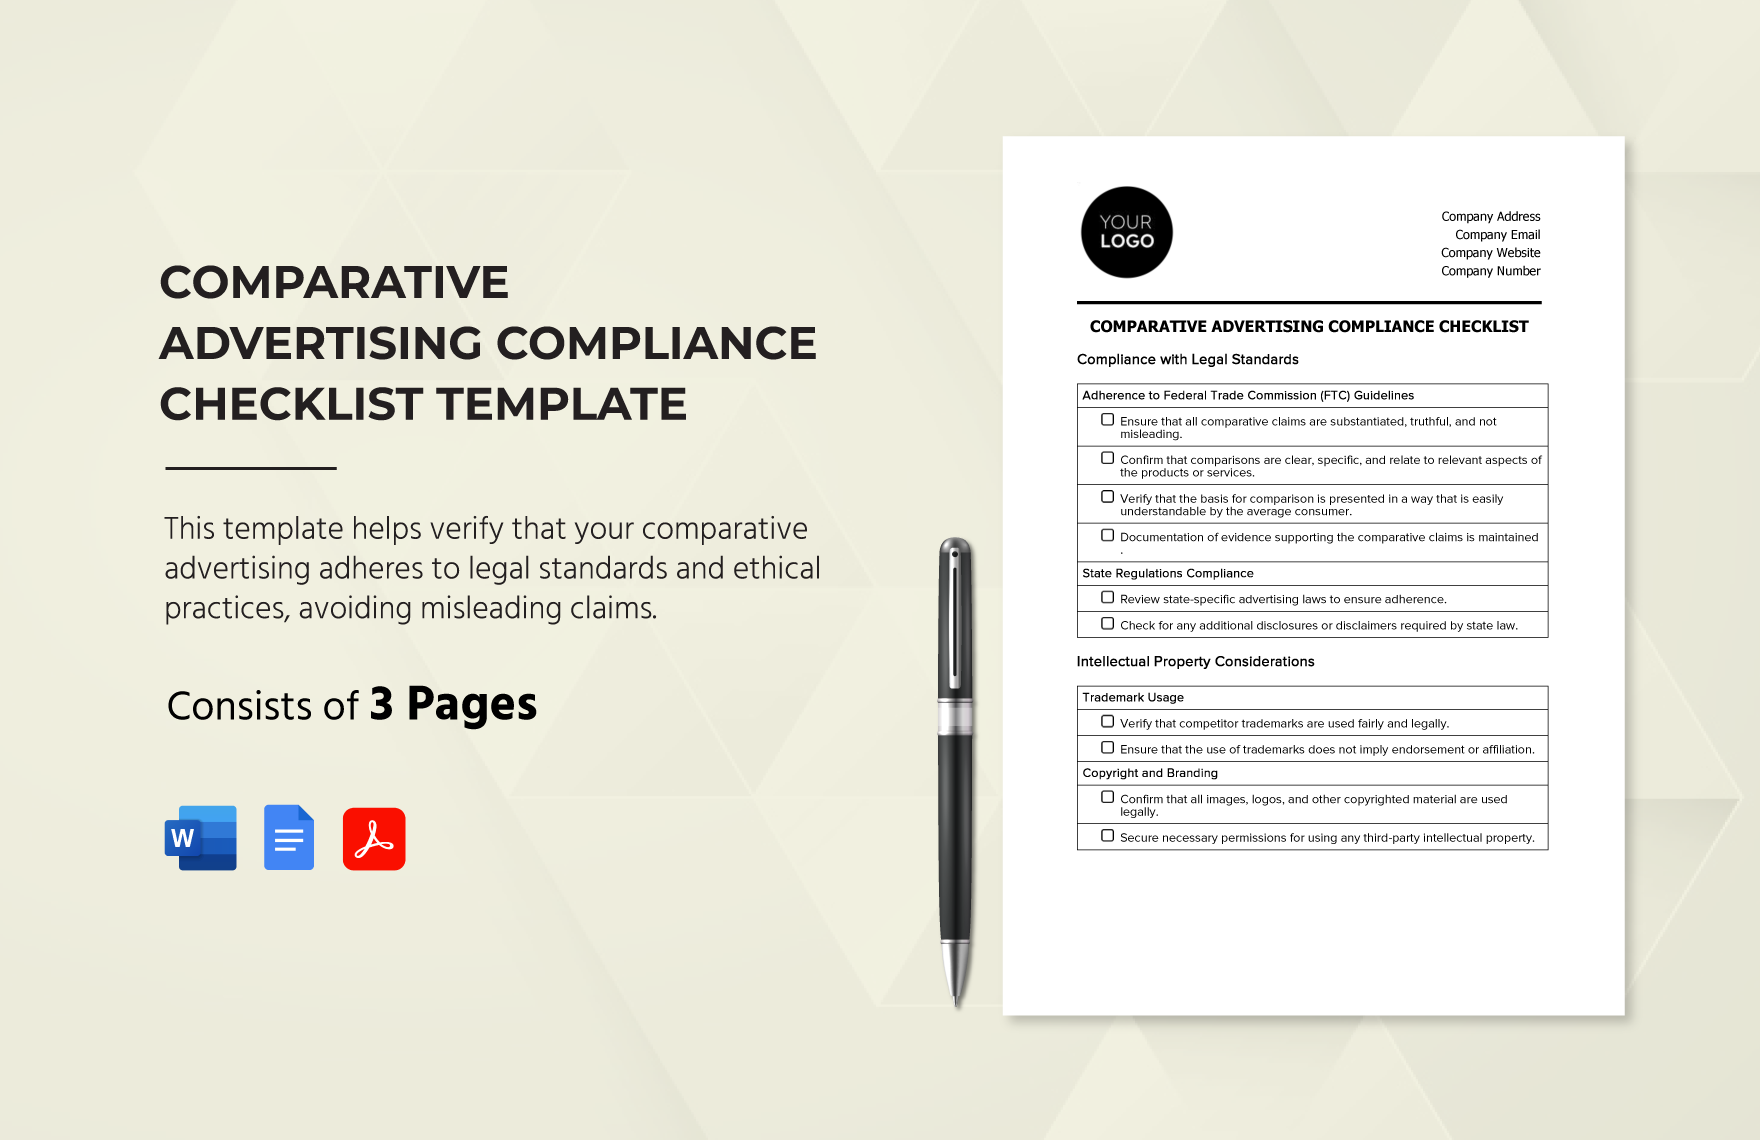 Comparative Advertising Compliance Checklist Template in Word, Google Docs, PDF